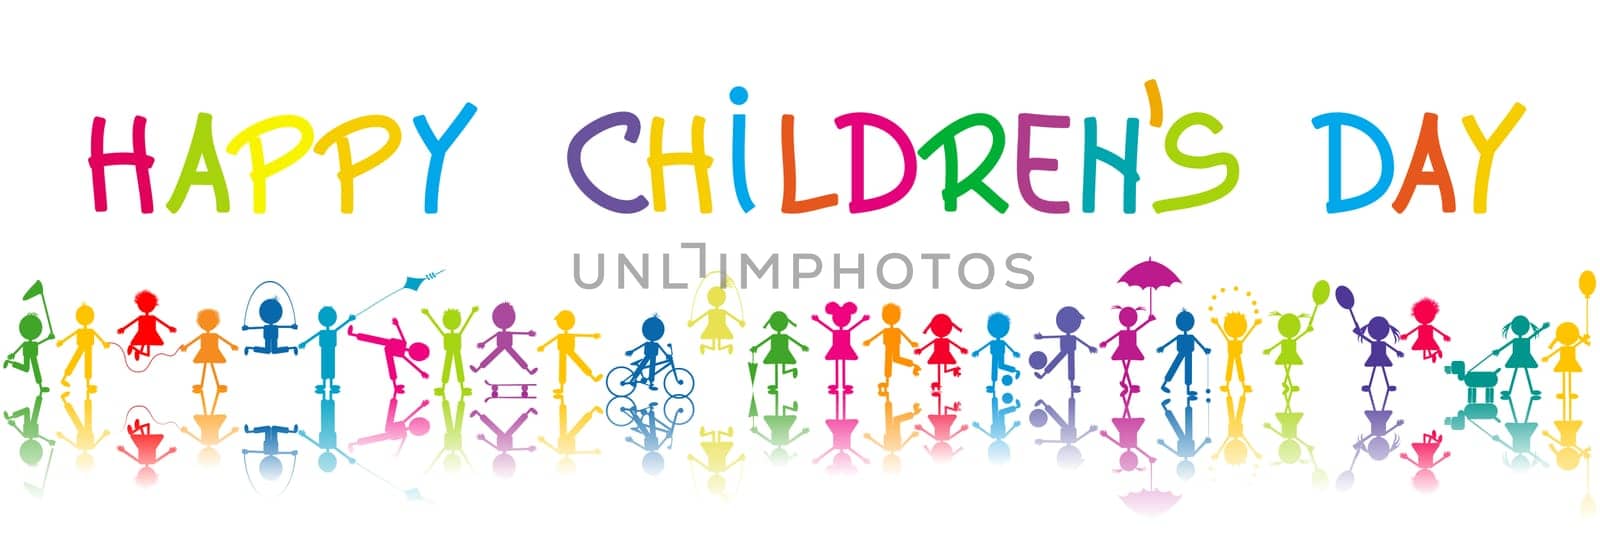 Happy Children's Day poster with stylized children with shadows playing